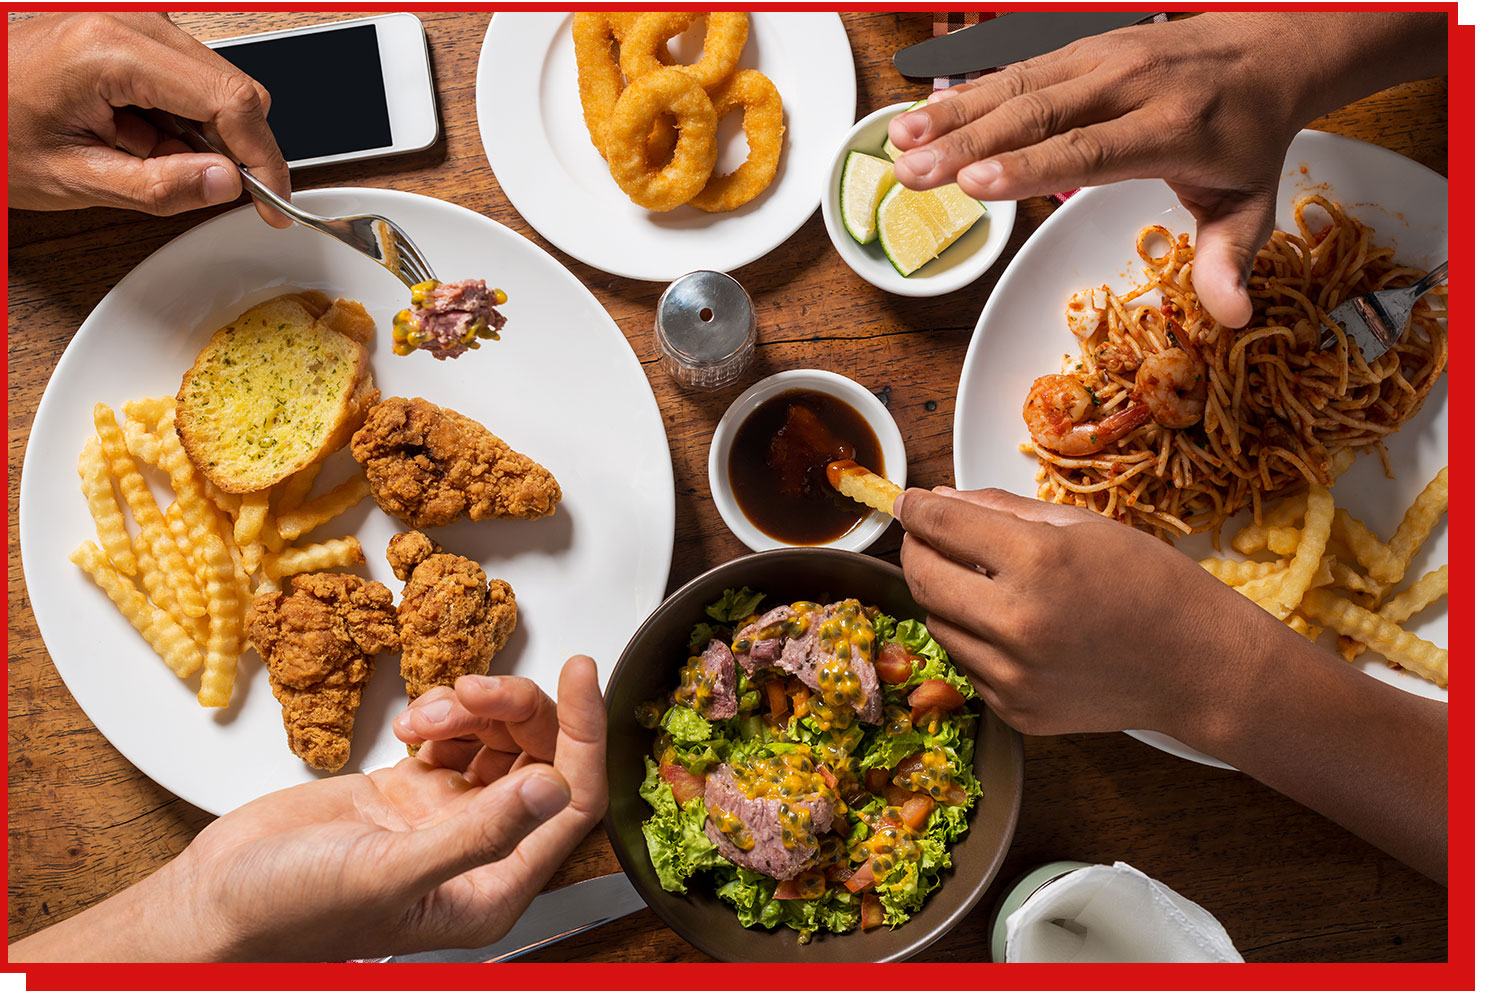 A table laden with food and one person eating it with their hands while the other holds a fork 